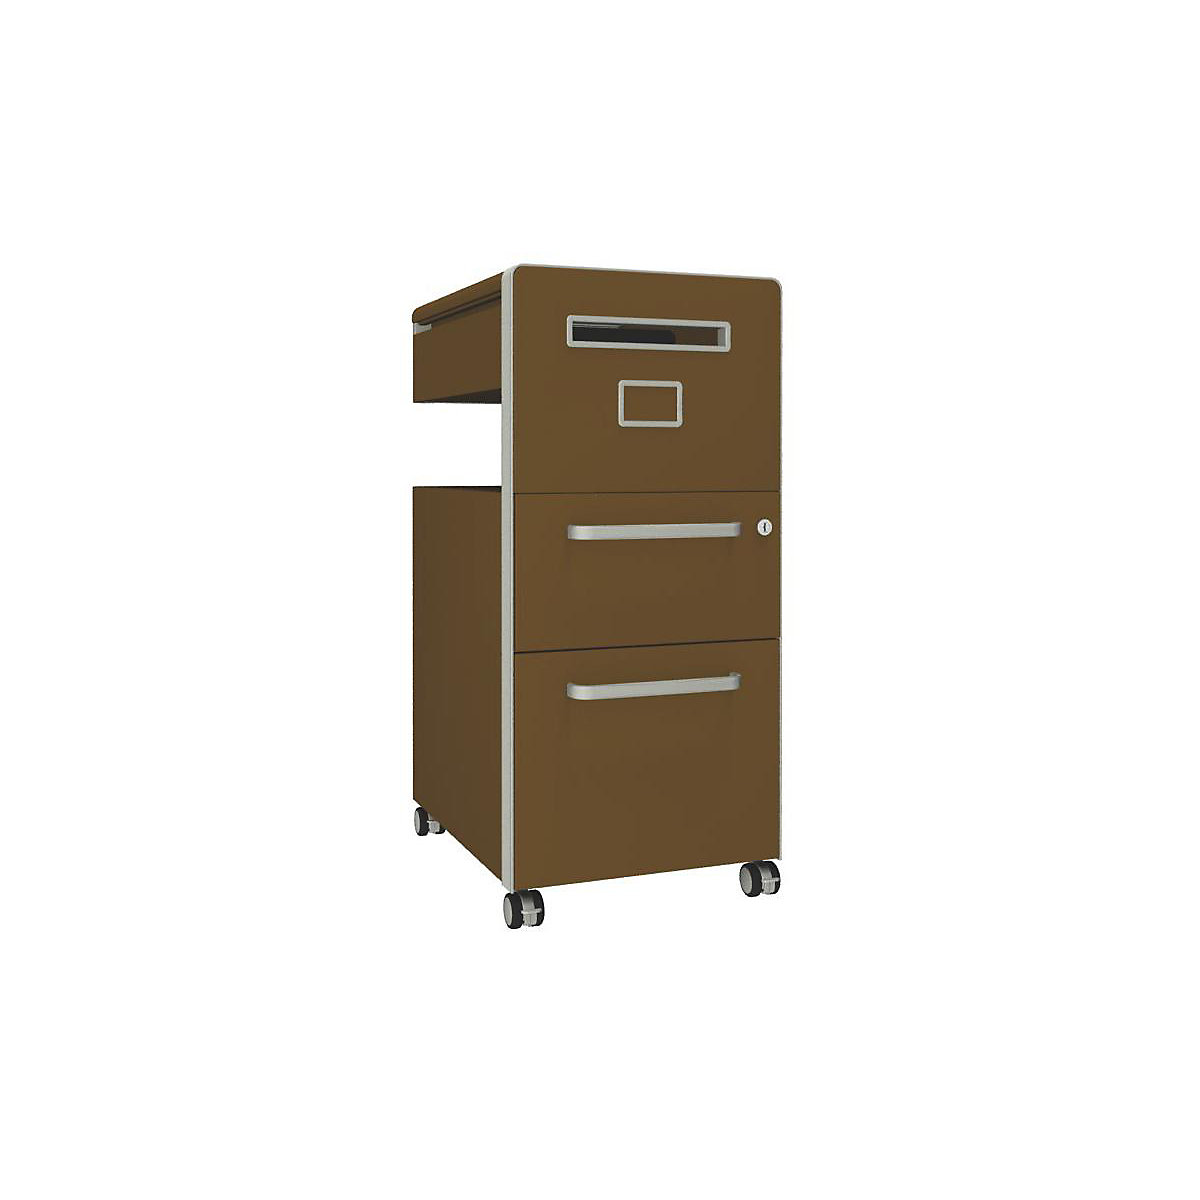 Bite™ pedestal furniture, with 1 whiteboard, opens on the right side – BISLEY, with 1 universal drawer, 1 suspension file drawer, dijon-28